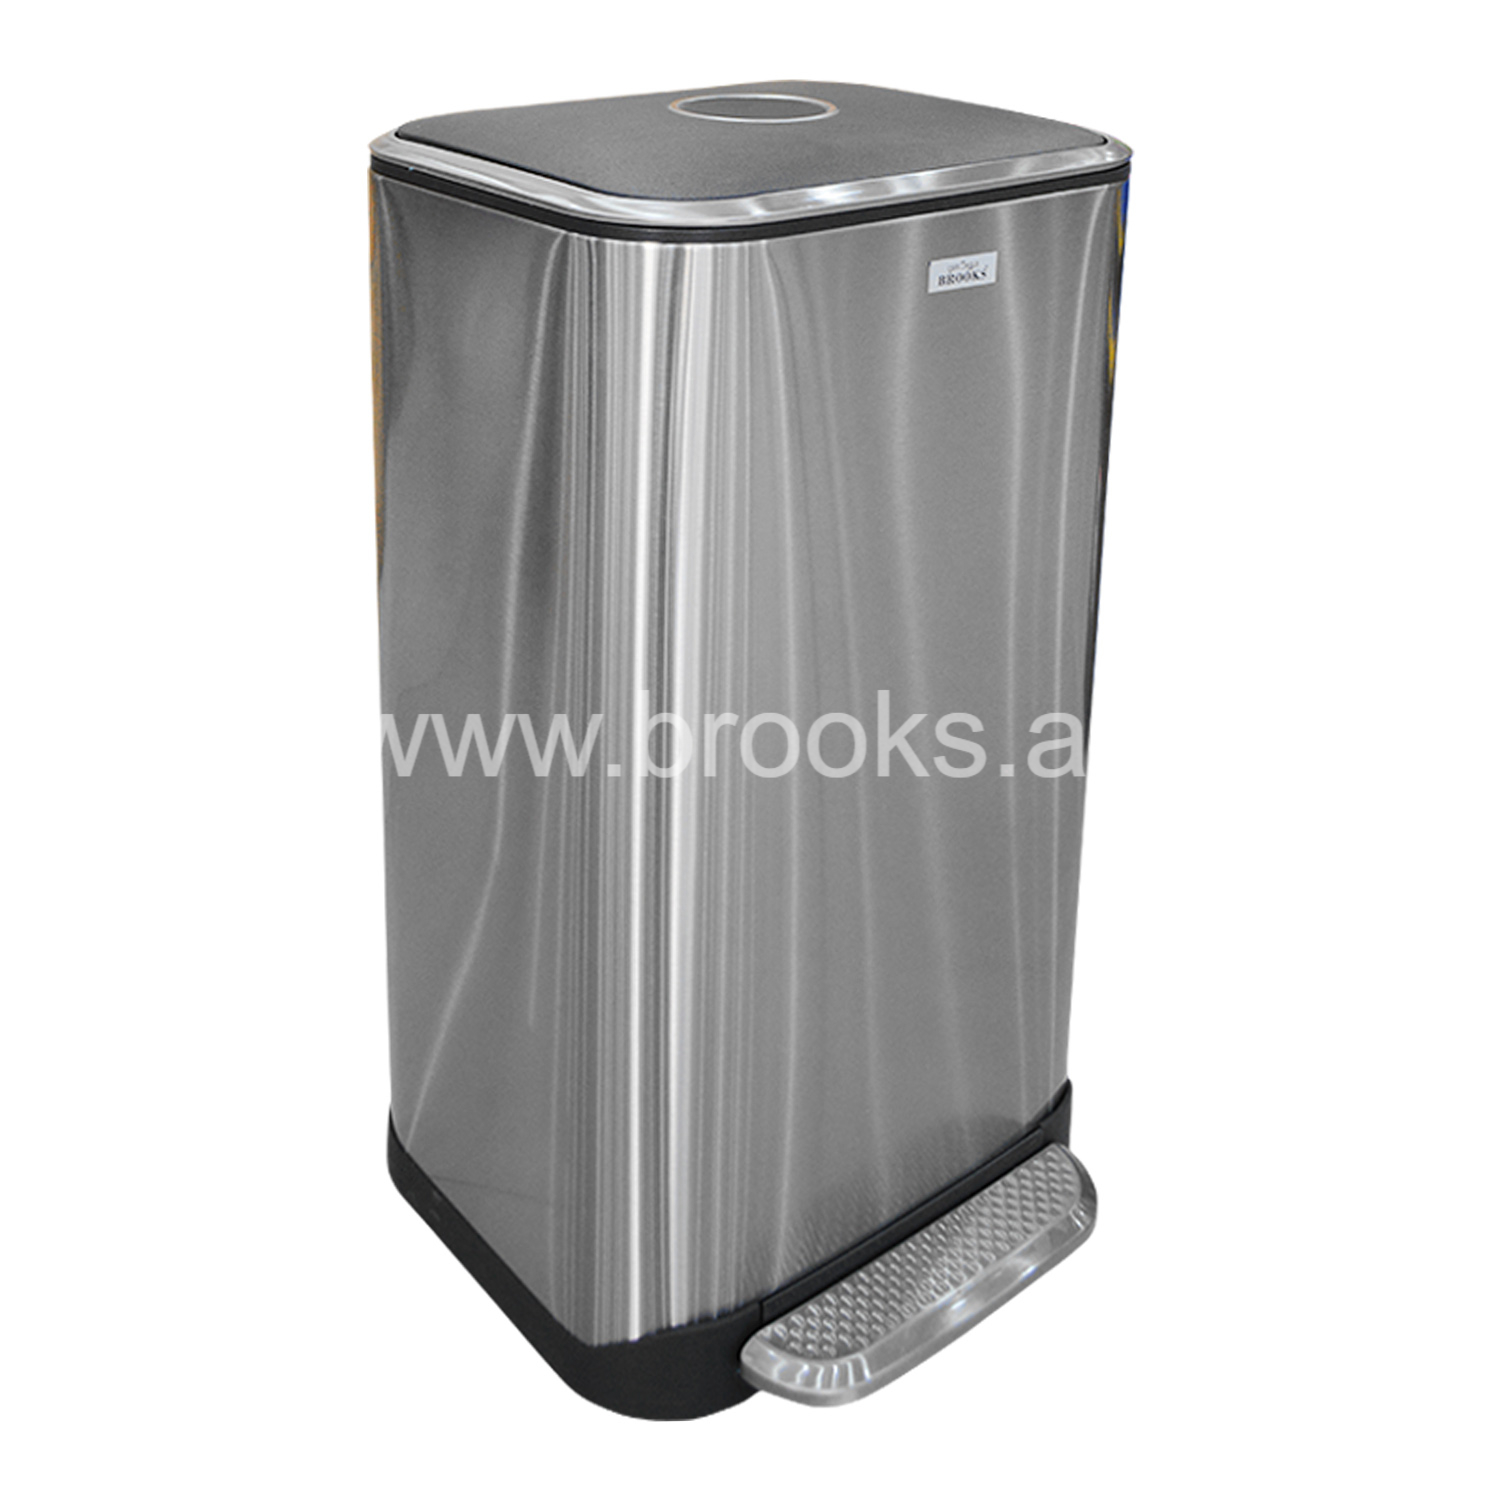 Brooks DOMINO SS Pedal Bin with Soft close 32Ltr.